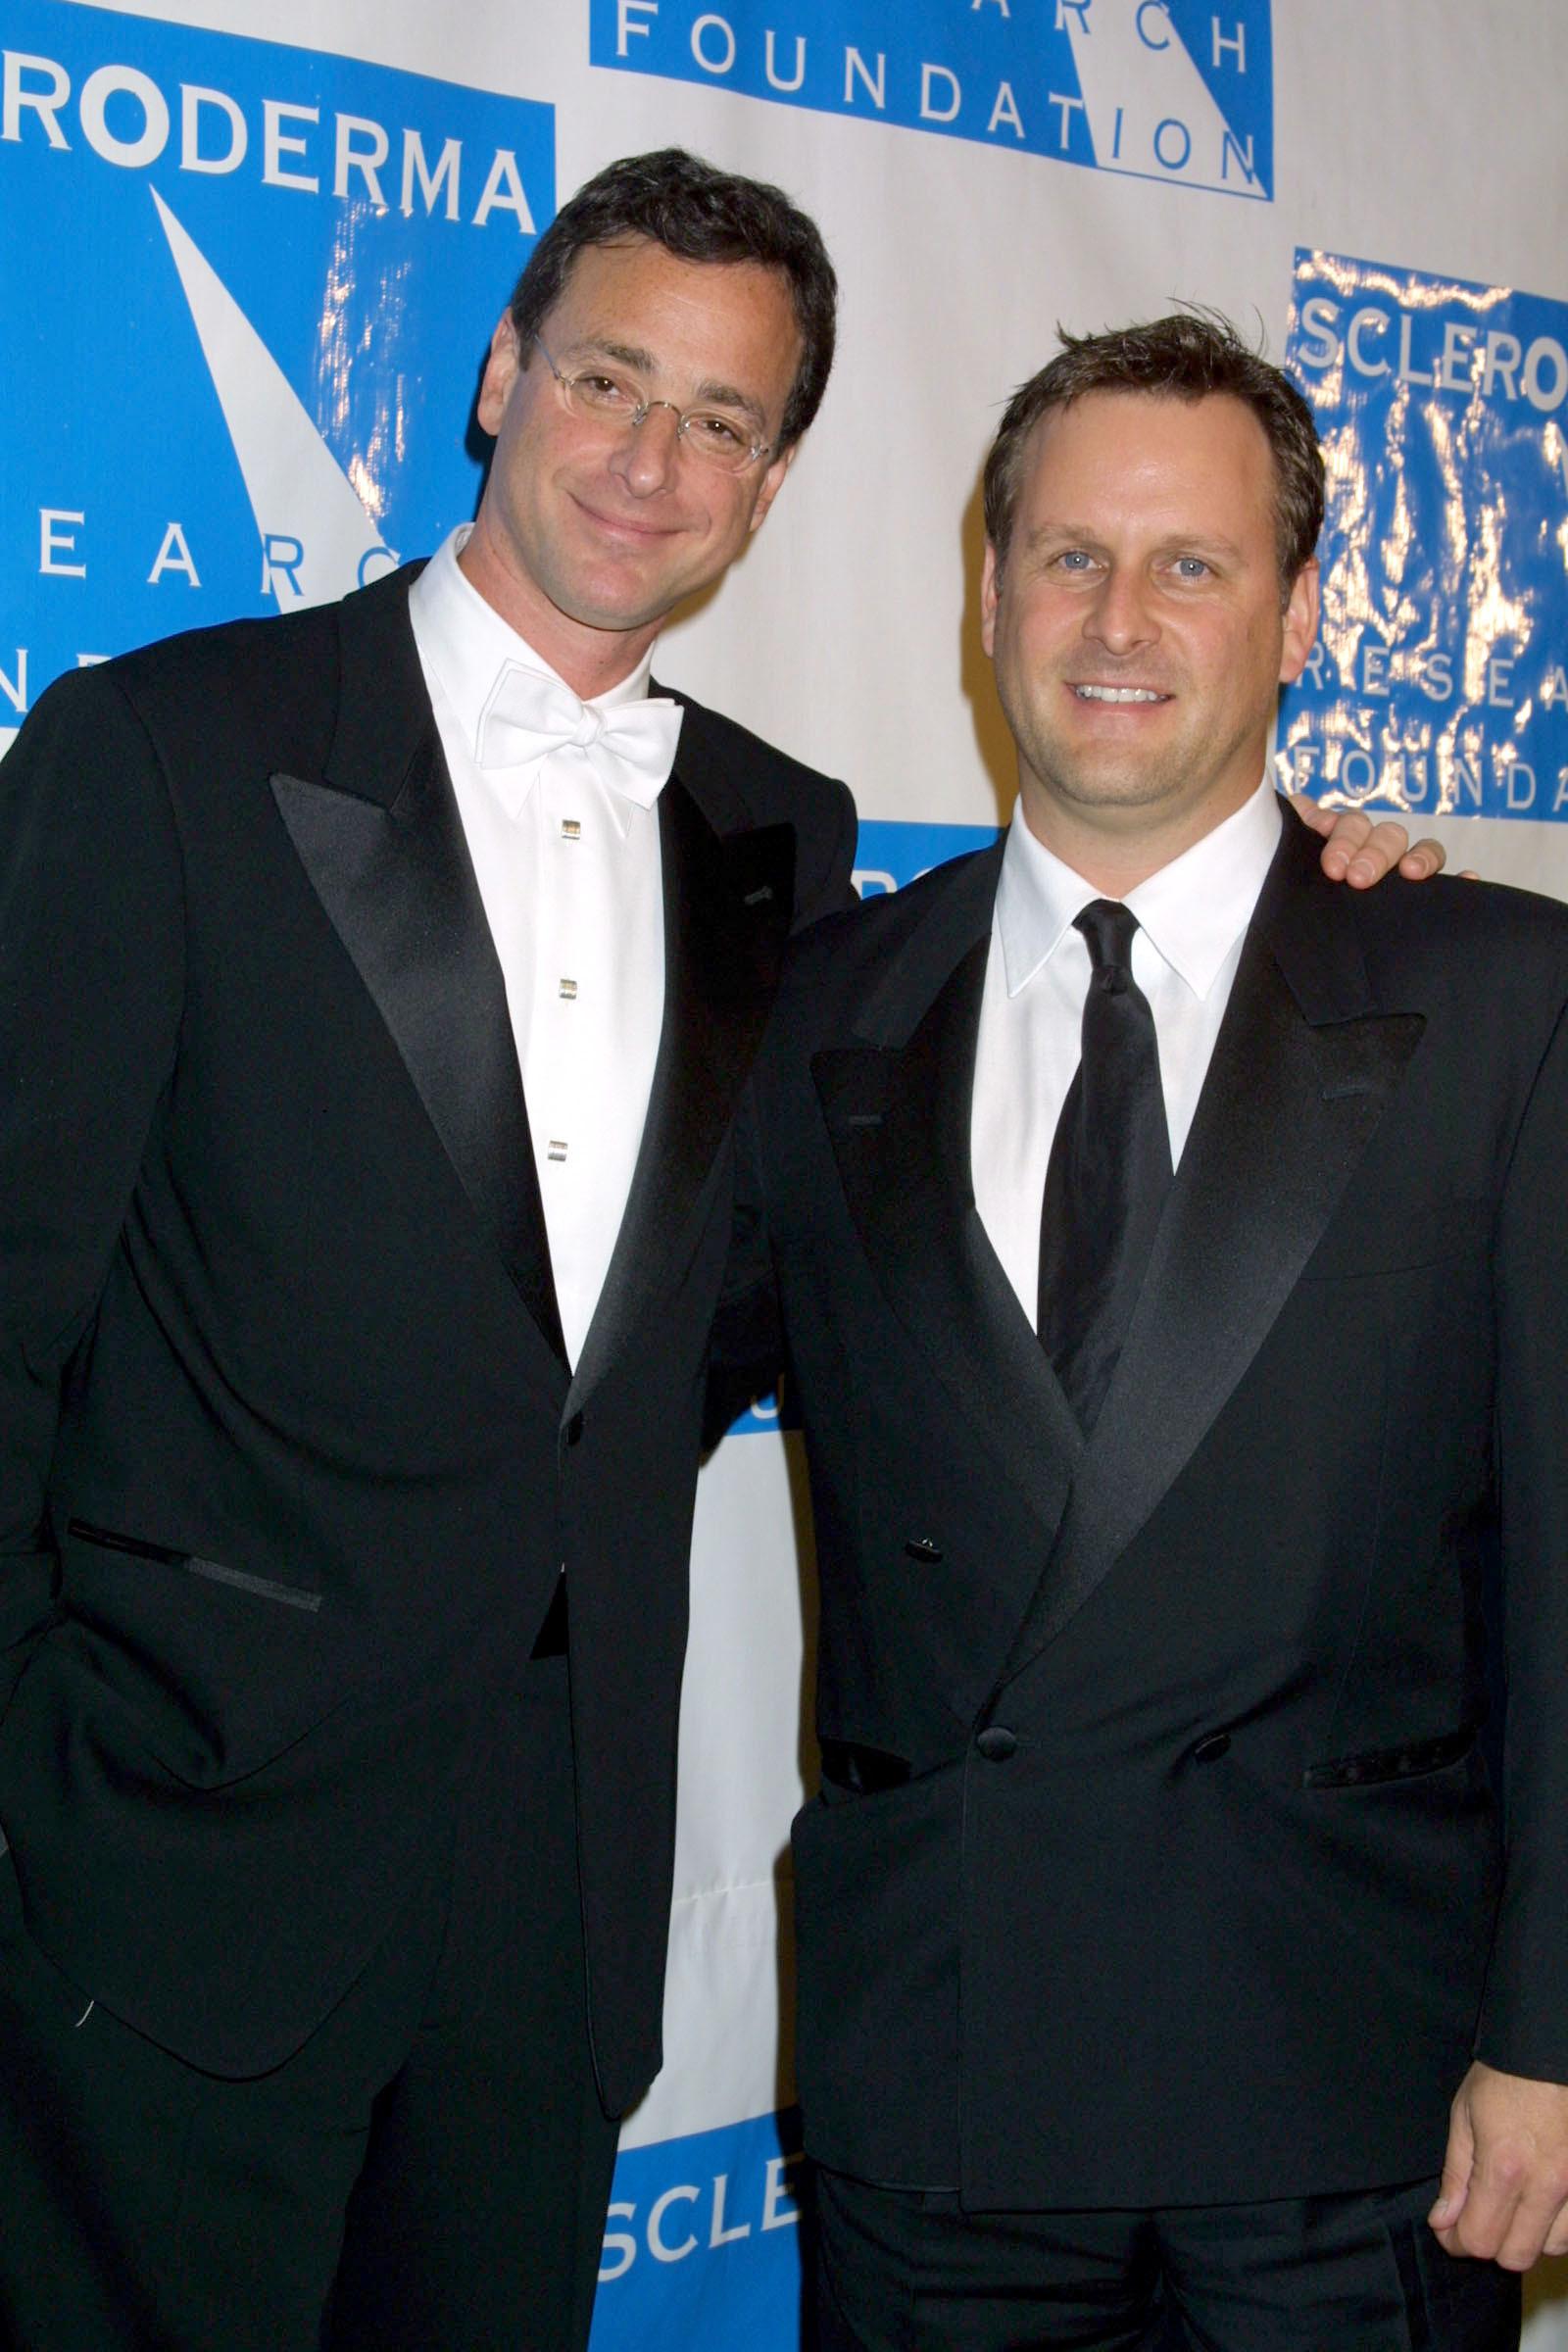 Bob Saget's Death: Head Injury So Bad, It Could Have Come From A 'Bat'